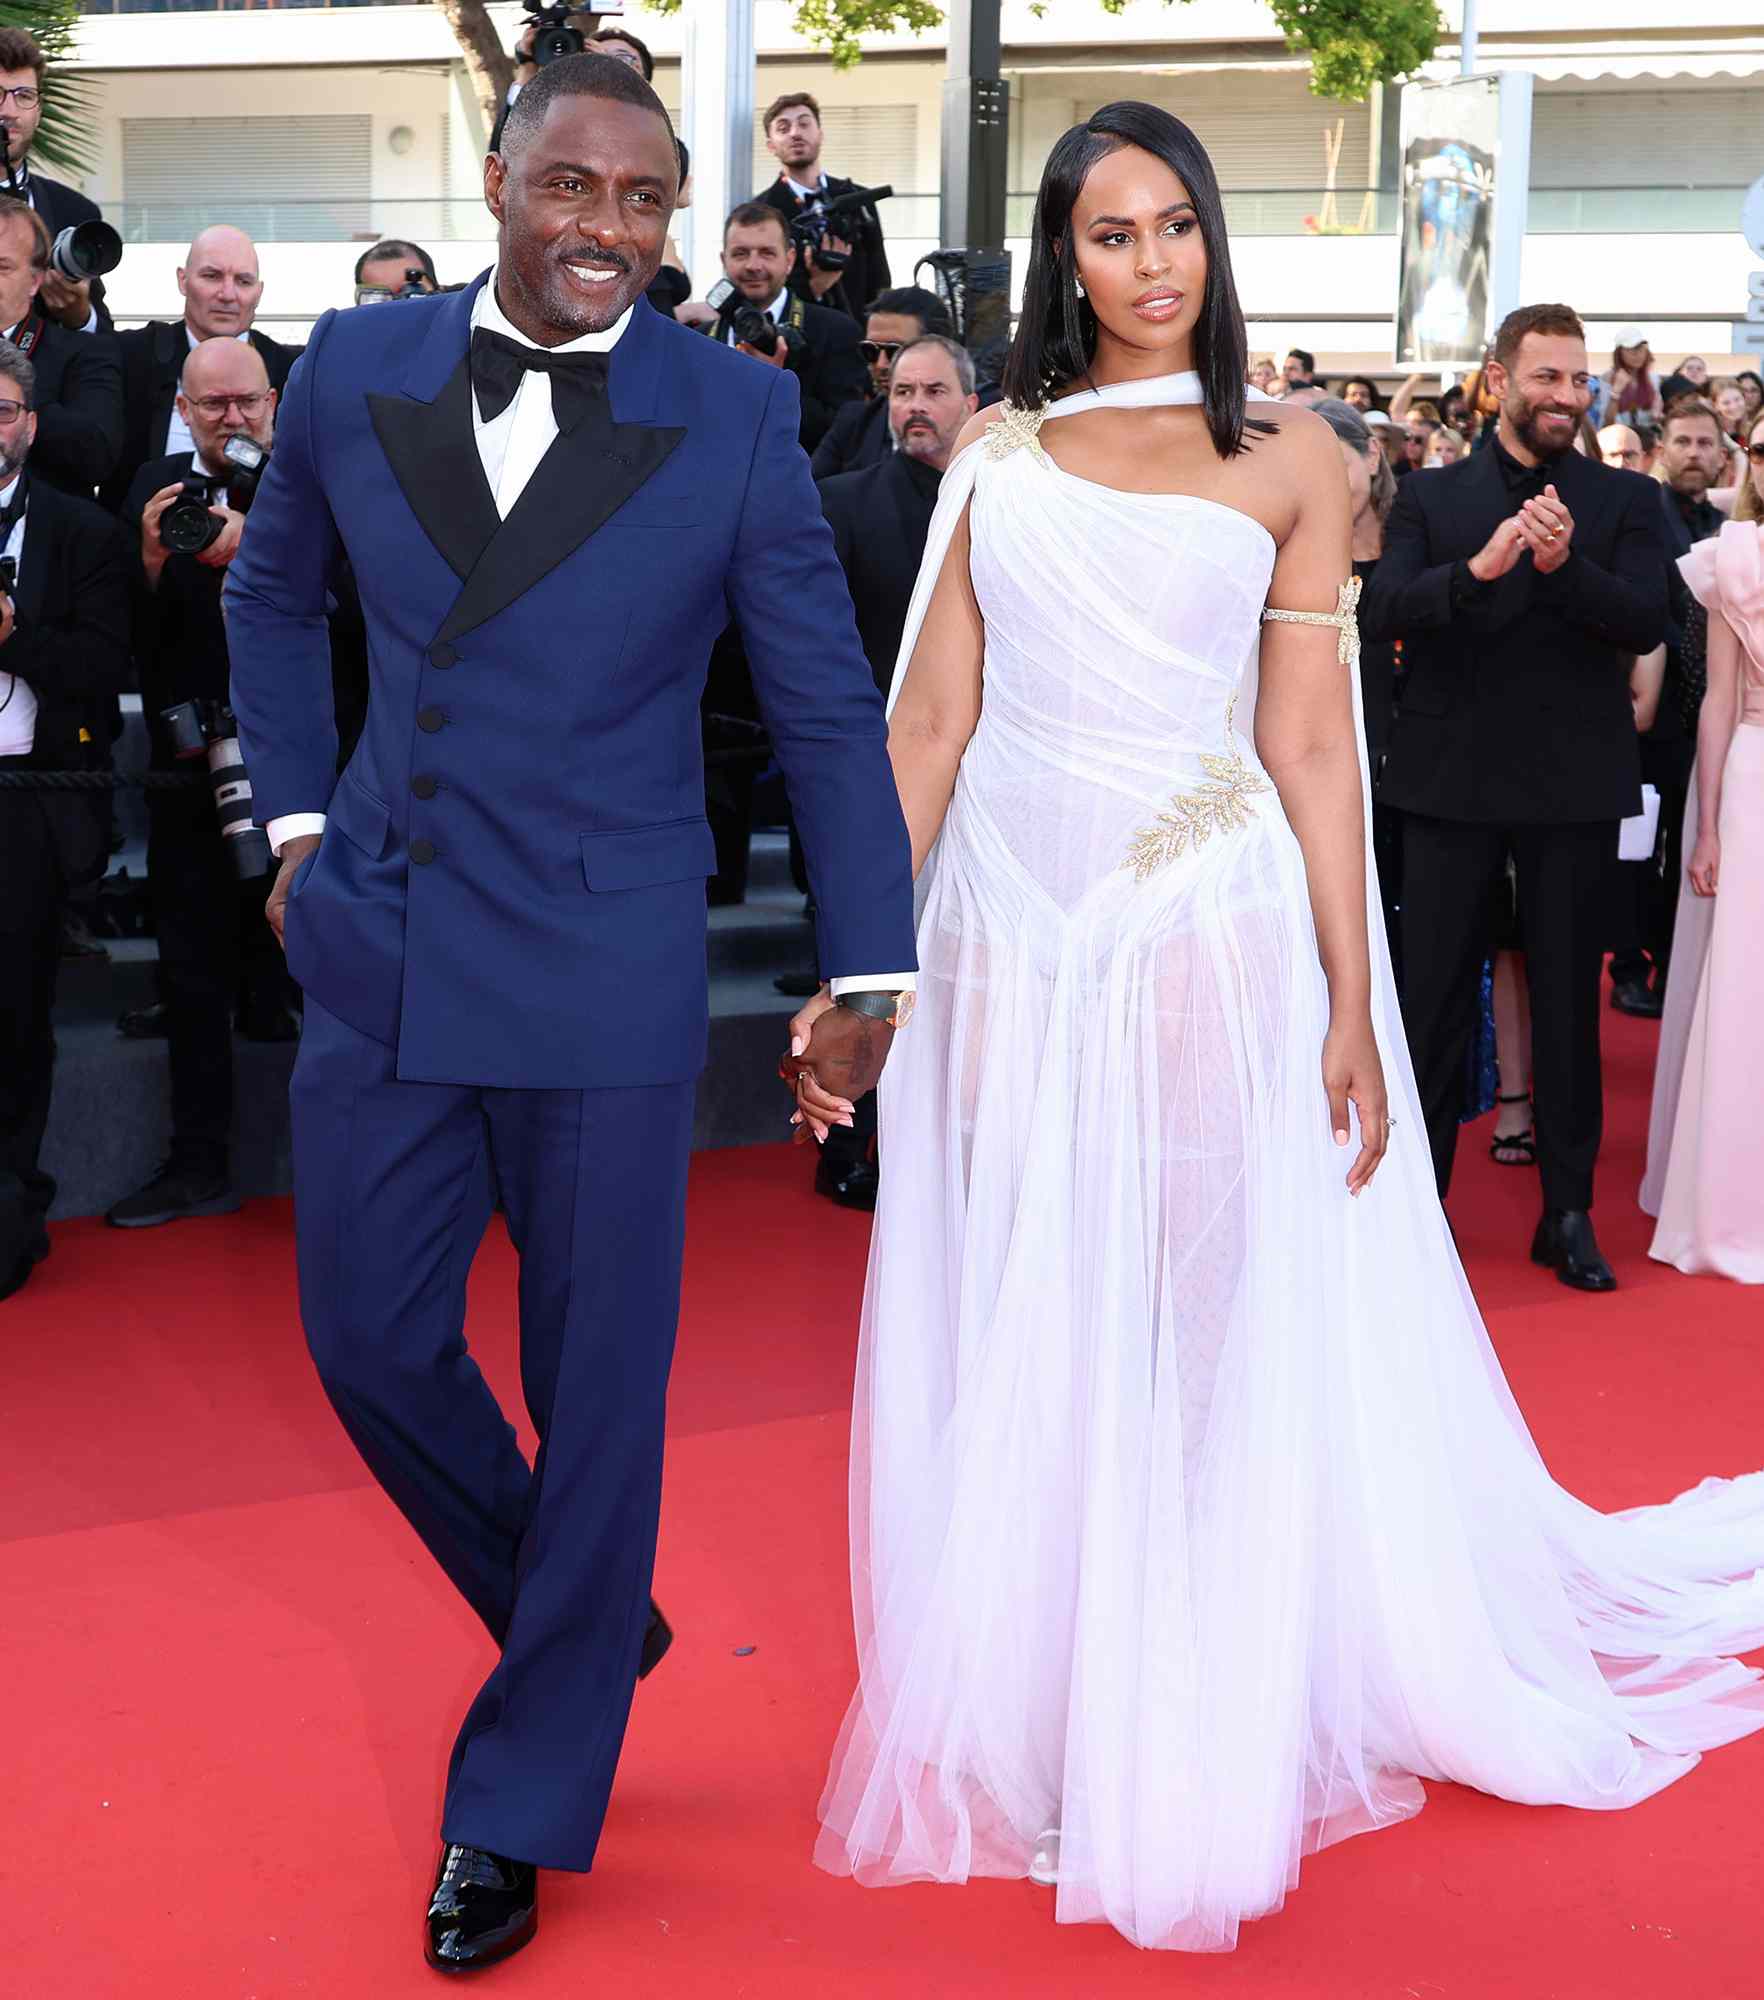 Idris Elba and Sabrina Elba attend the screening of "Three Thousand Years Of Longing (Trois Mille Ans A T'Attendre)" during the 75th annual Cannes film festival at Palais des Festivals on May 20, 2022 in Cannes, France